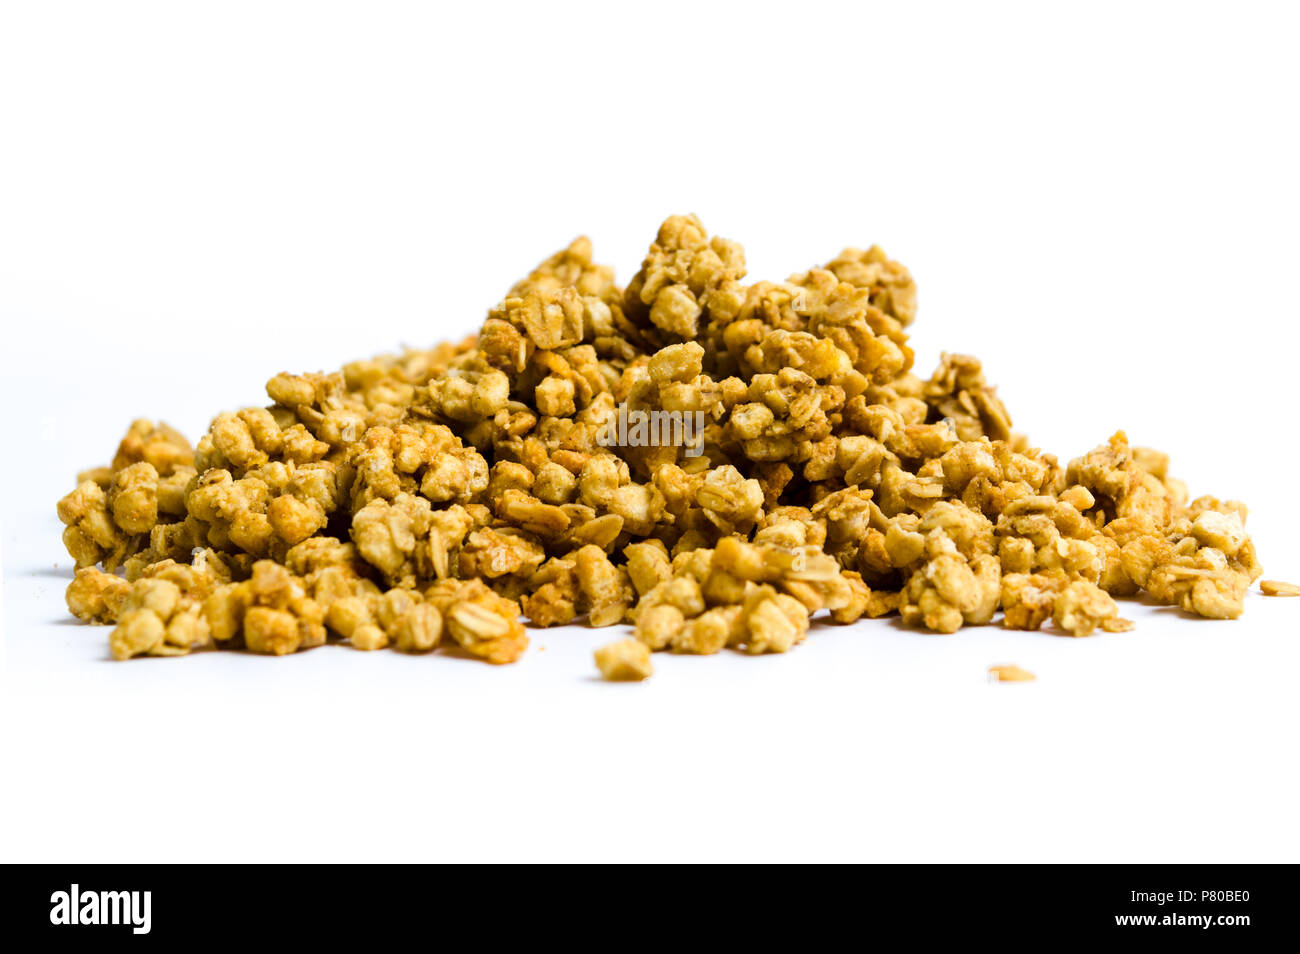 Muesli with peanuts on a pile, healthy food Stock Photo